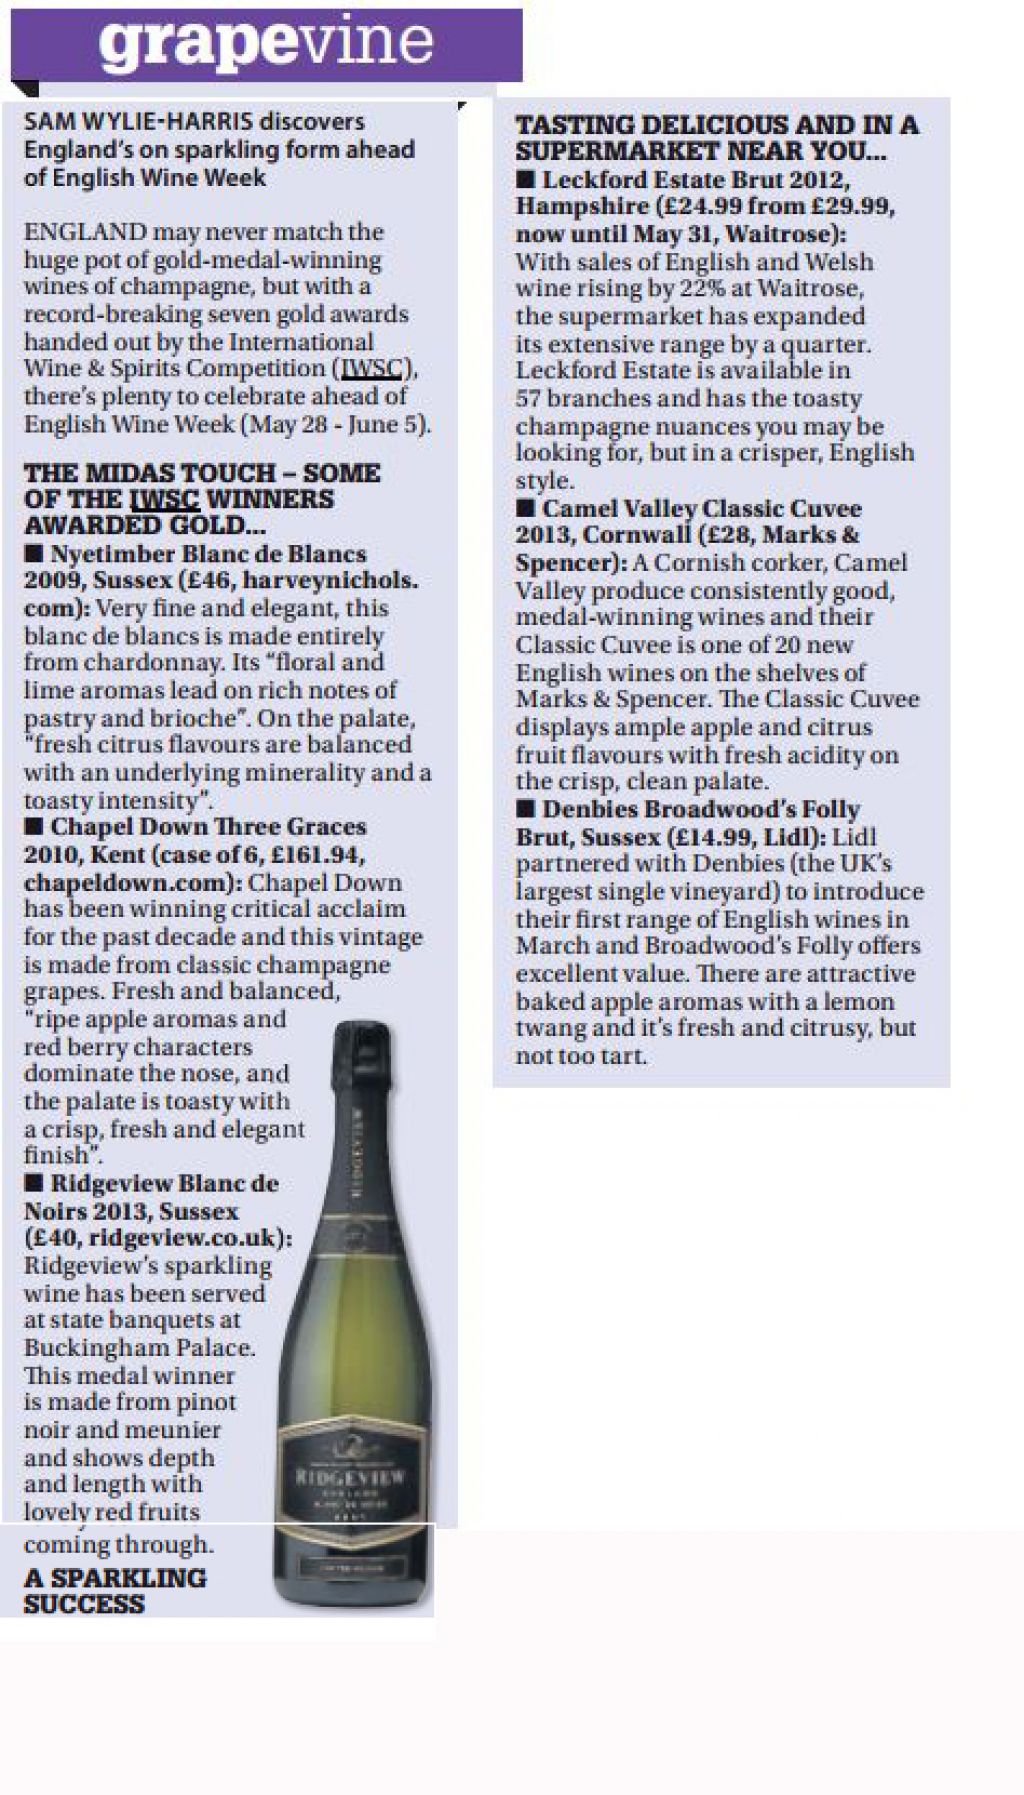 Sam Wylie-Harris discovers England's on sparkling form ahead of English Wine Week